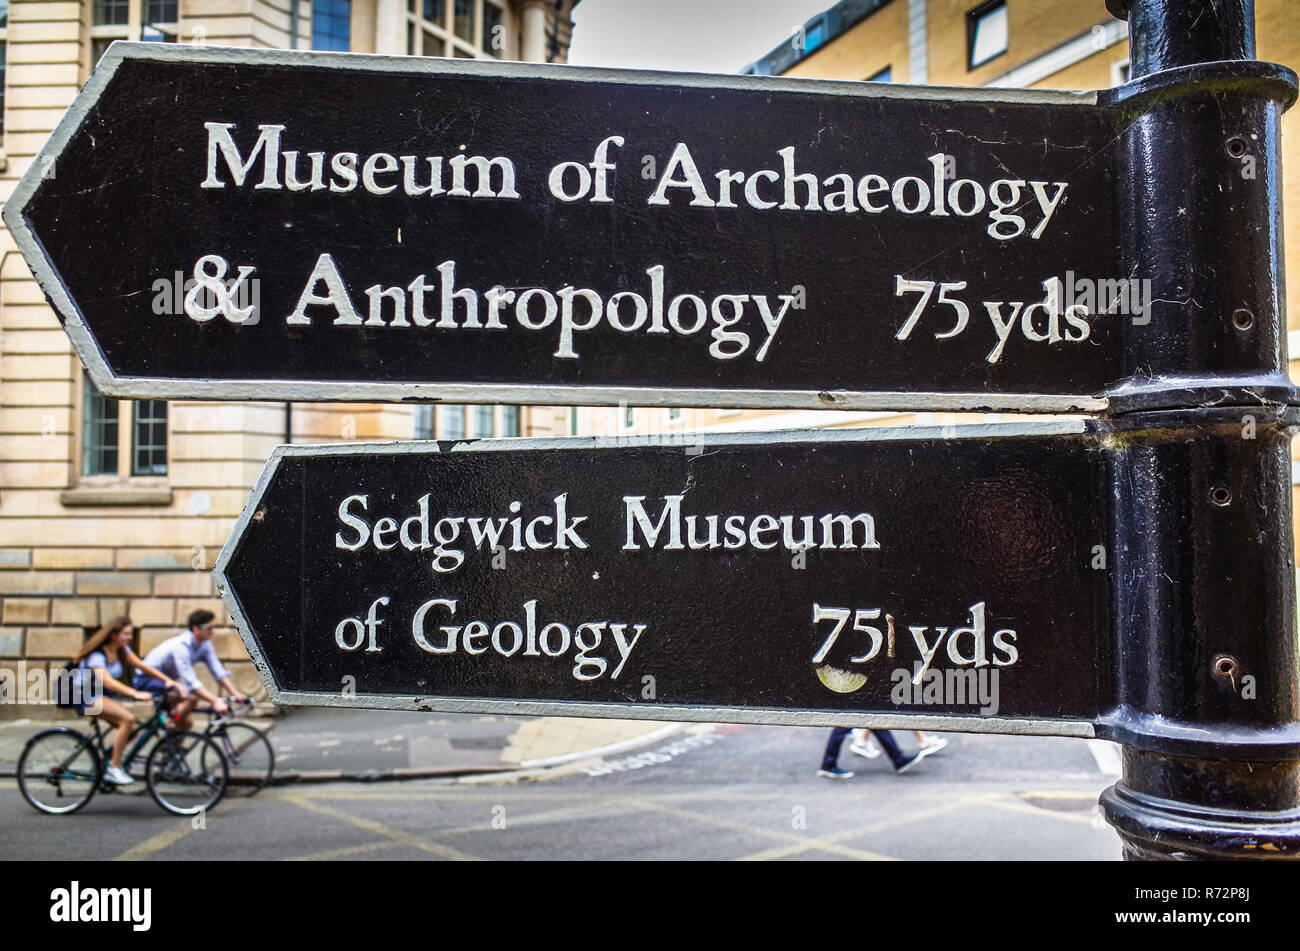 Cambridge Museums - signs to the Museum of Archaeology and Anthropology and the Sedgwick Museum of Geology in central Cambridge UK Stock Photo